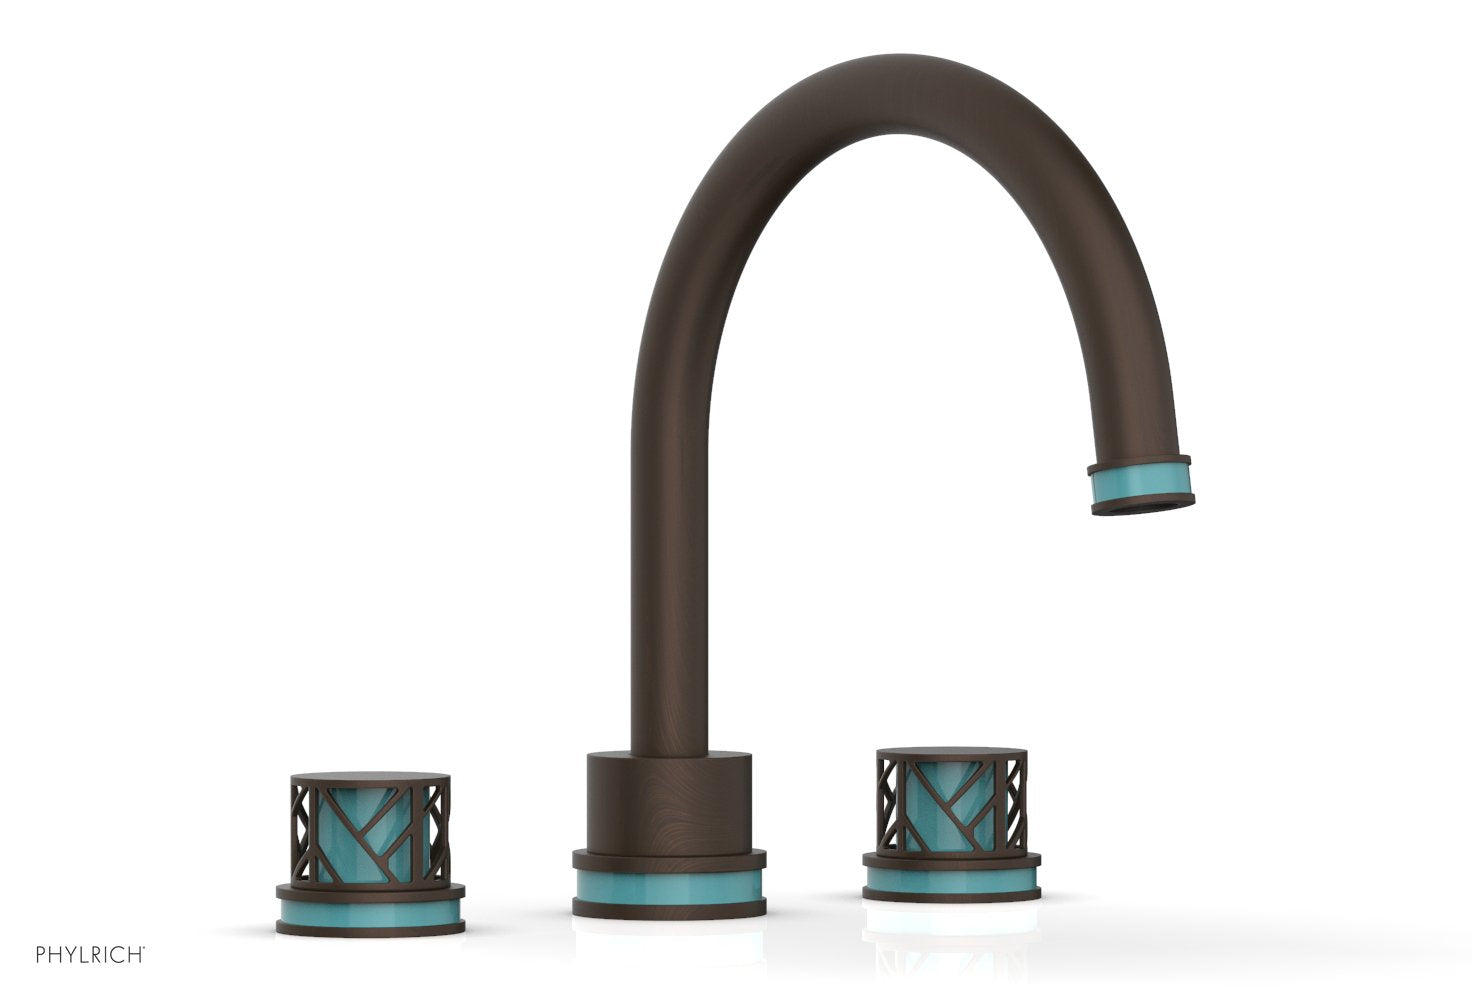 Phylrich JOLIE Deck Tub Set - Round Handles with "Turquoise" Accents